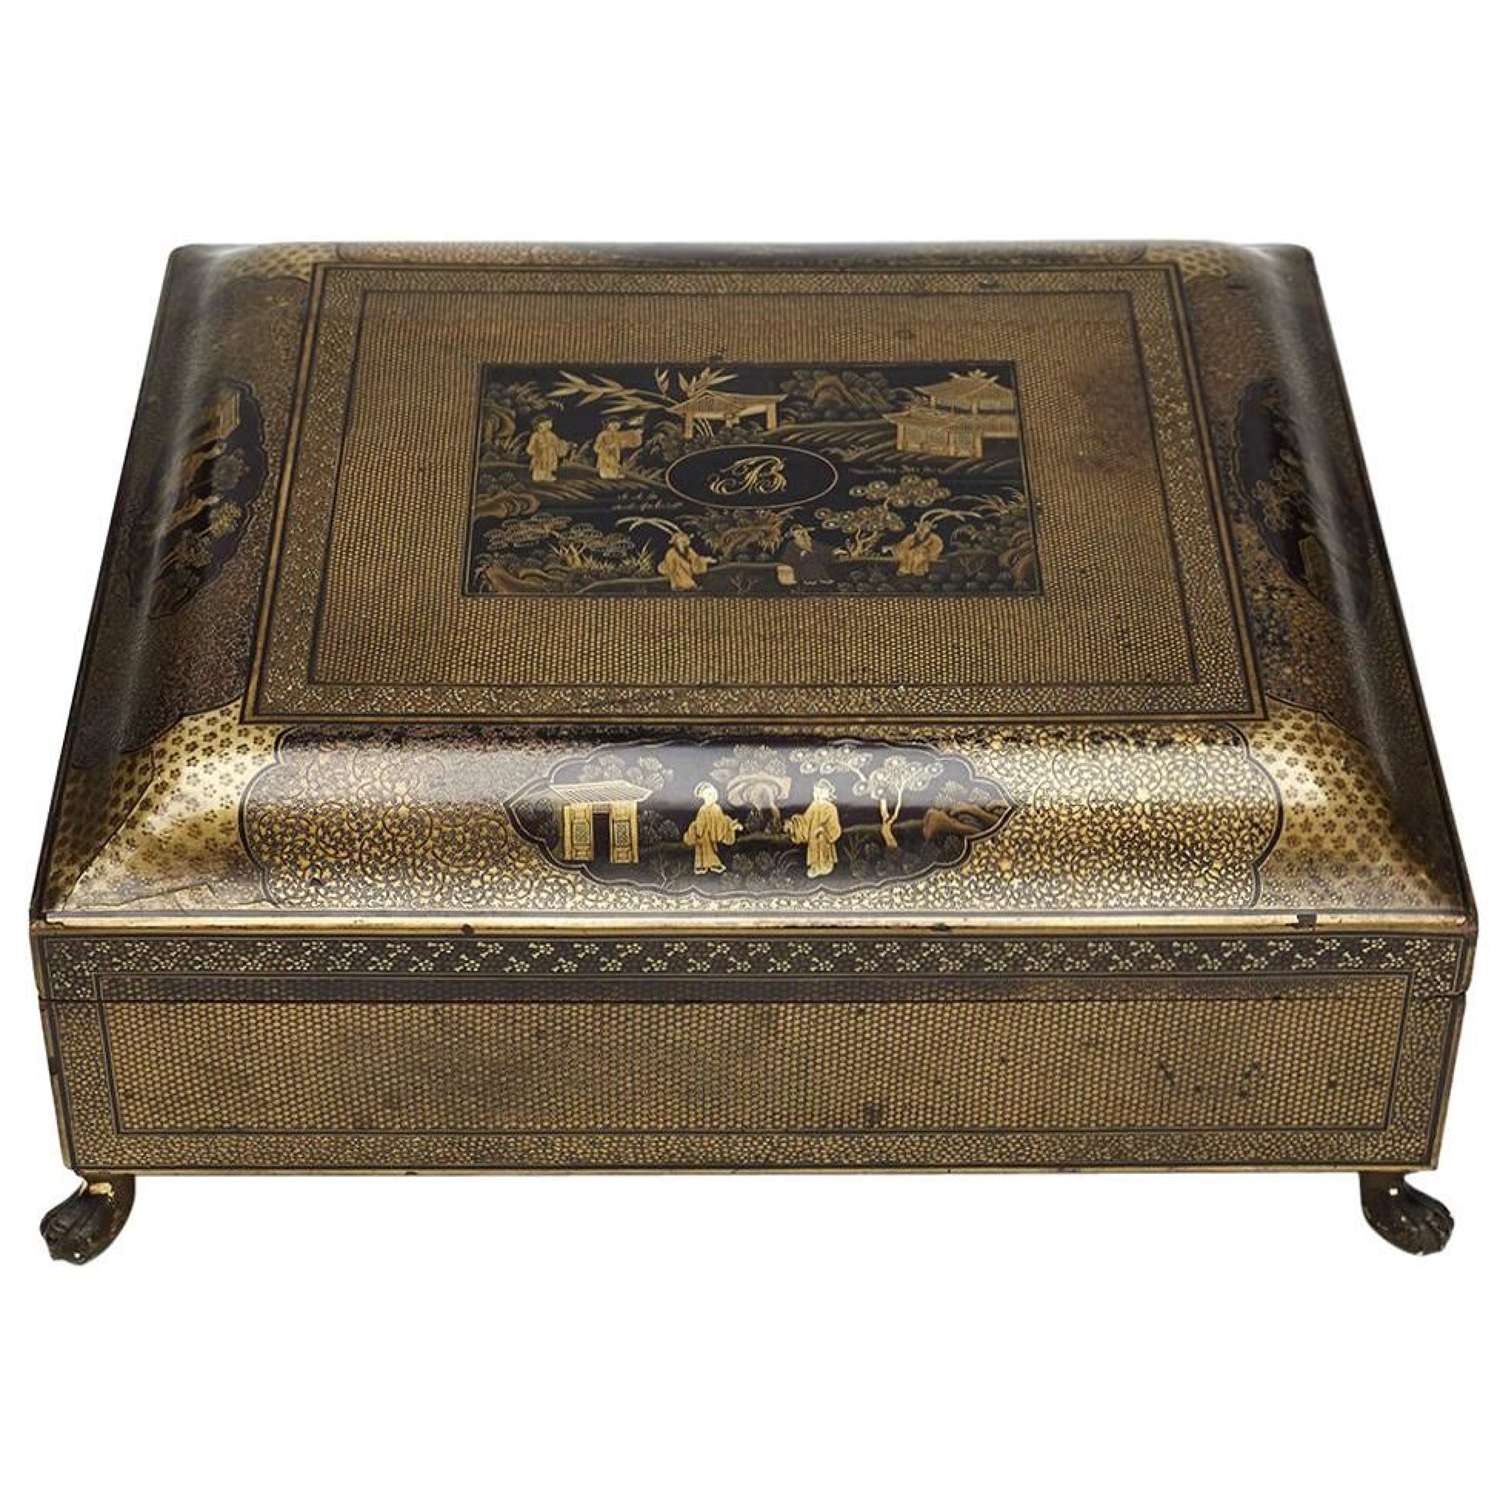 Chinese Gold and Black Lacquer Games Box, Early 19th Century